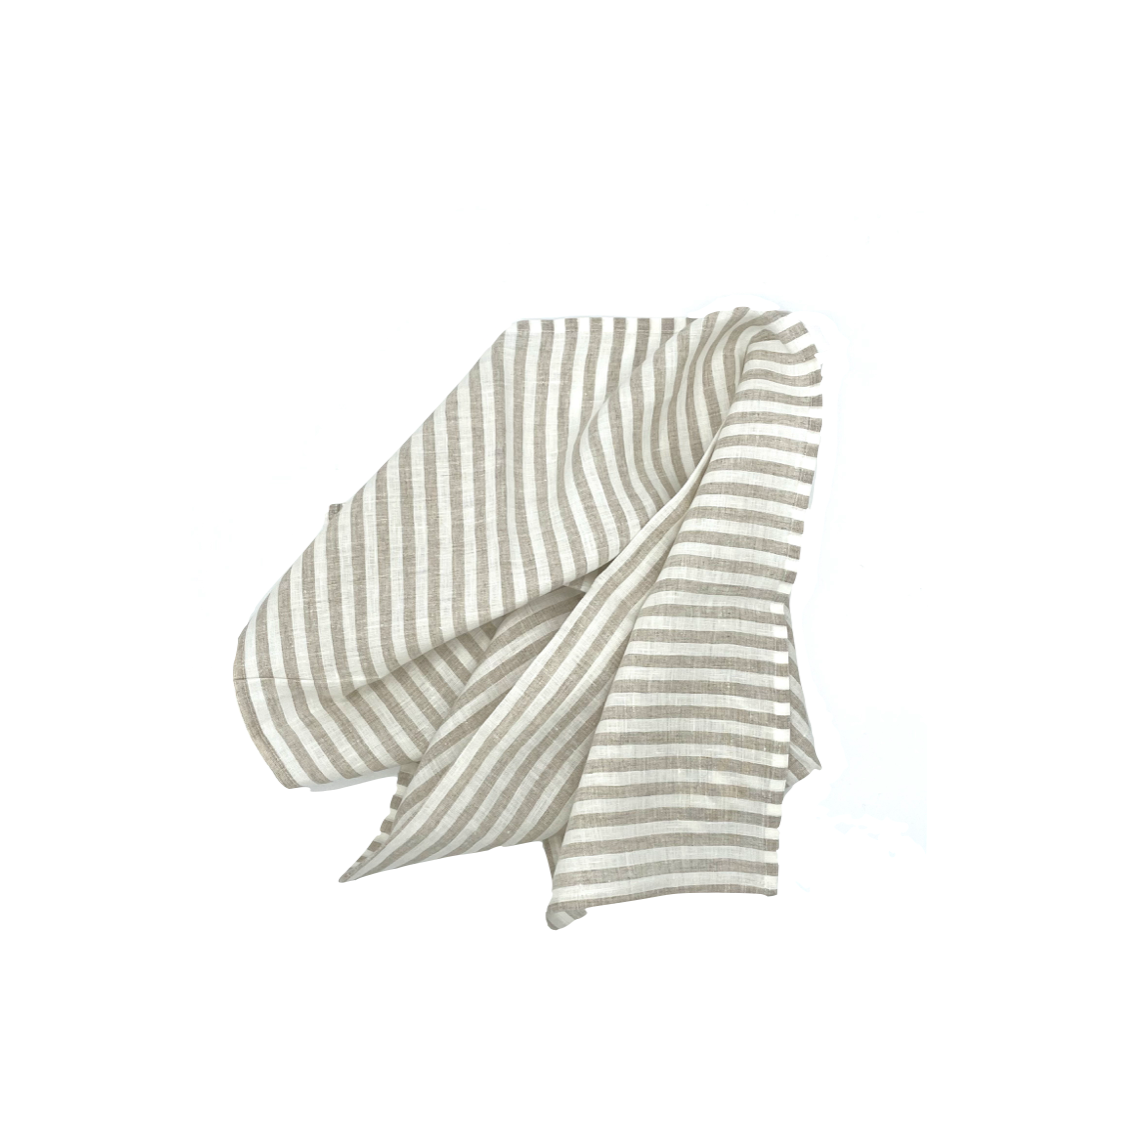 one striped tea towel in natural and white linen, strewn messily